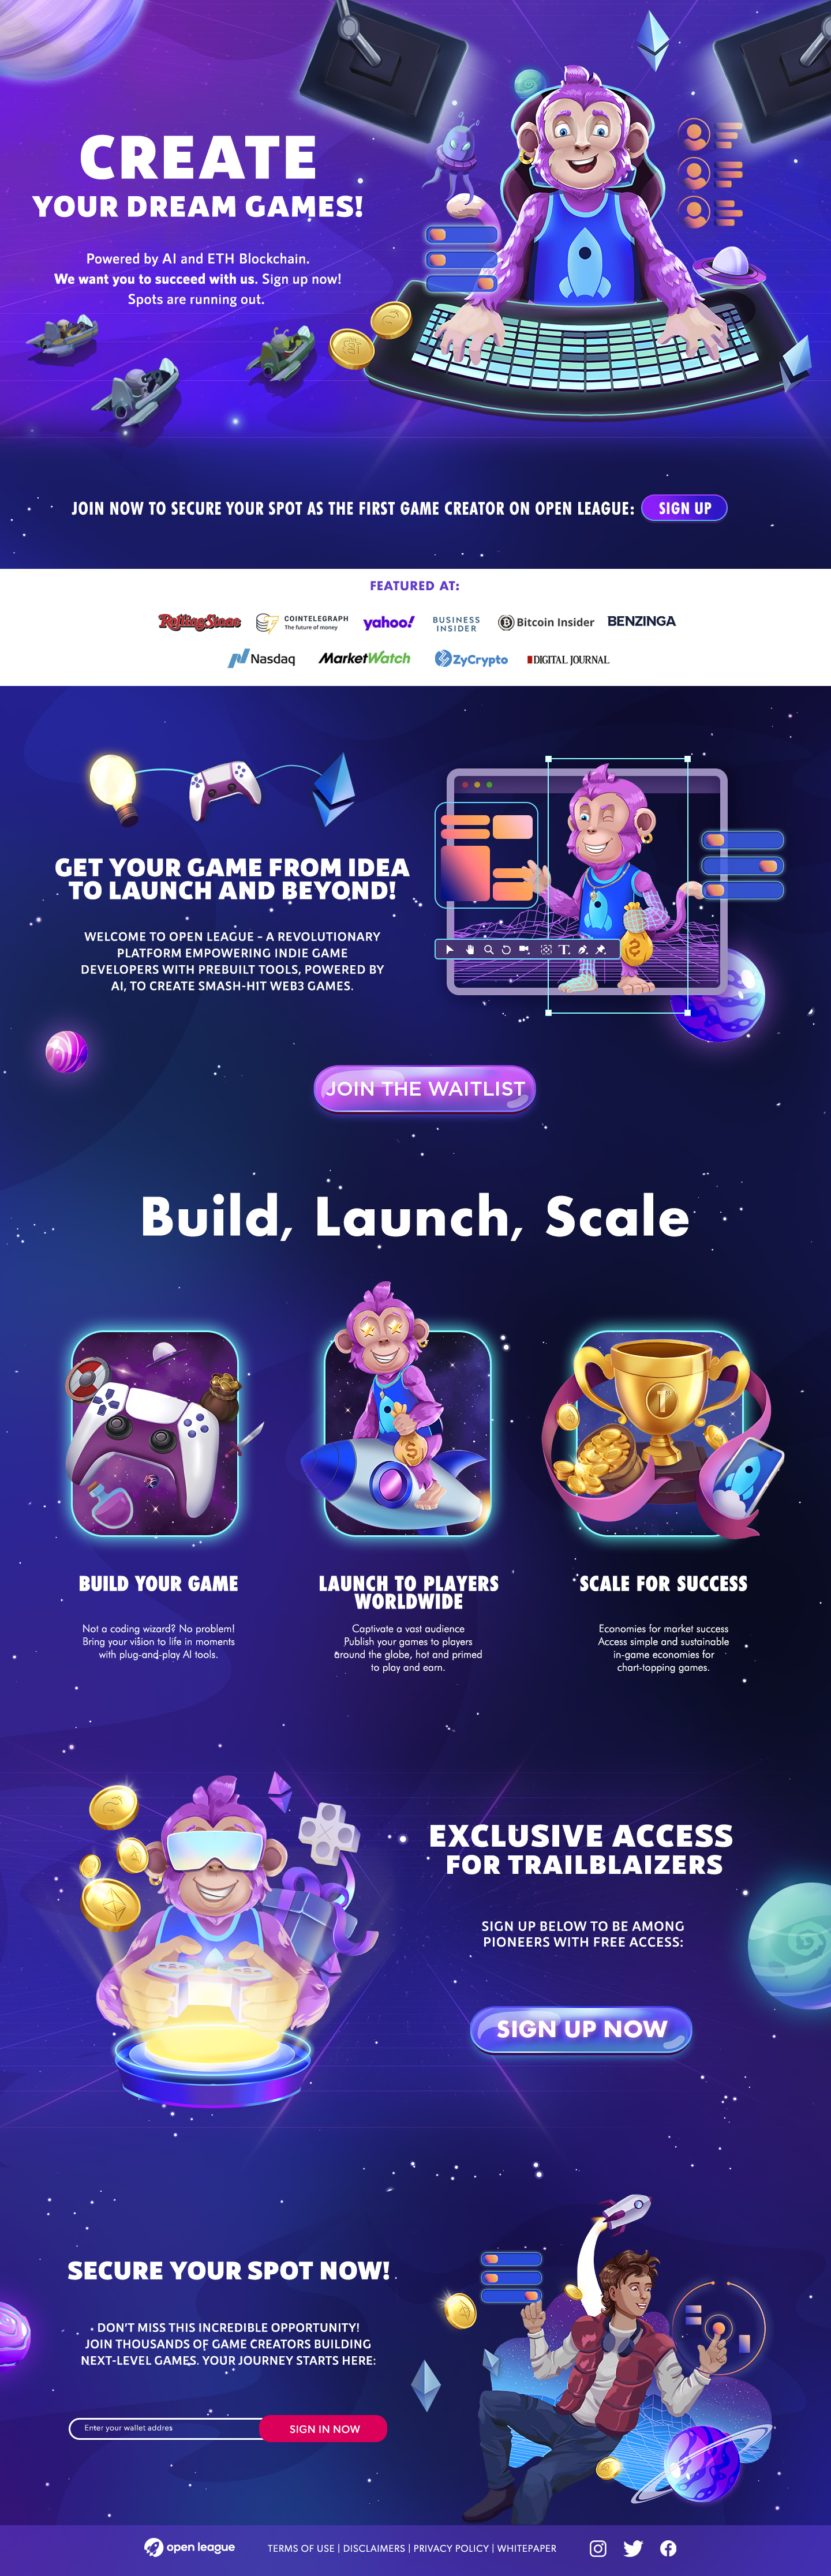 CREATE

YOUR DREAM GAMES!

Powered by Al and ETH Blockchain.
We want you to succeed with us. Sign up now!
MEET OLLIE TS

ot SA
~® “ad
Vd 7 "

JOIN NOW TO SECURE YOUR SPOT AS THE FIRST GAME CREATOR ON OPEN LEAGUE: (_ SIGN UP )

FEATURED AT:

RofliagTeae CMV yahoo! 5usitss  (@)Bitcoin Insider BENZINGA

Nasdaq Market €DzyCrypto  EDIGITAL JOURNAL

 

GET YOUR GAME FROM IDEA
LAWL [oY (oR: de] | 1 0

3
WELCOME TO OPEN LEAGUE - A REVOLUTIONARY
PLATFORM EMPOWERING INDIE GAME
DEVELOPERS WITH PREBUILT TOOLS, POWERED BY
Al, TO CREATE SMASH-HIT WEB3 CAMES.

 

 

BUILD YOUR GAME LAUNCH TO PLAYERS “SCALE FOR SUCCESS
WORLDWIDE
Not 6 coding wizord? No problem Coptvate 0 vost audience Economies for morket success
Bring your vision fo life in moments Publish your gomes to players Access simple and sustainable
with plug-and-play Al fools 8round the globe, hot and primed in-game economies for
PY OSTENEe FT

   

PN
rx ee] .« EXCLUSIVE ACCESS

3 “ " FOR TRAILBLAIZERS

SIGN UP BELOW TO BE AMONG

», PIONEERS WITH FREE ACCESS:

GL

 

N— | ;
-
A
J
SECURE YOUR SPOT NOW!
0) + DON'T MISS THIS INCREDIBLE OPPORTUNITY!
JOIN THOUSANDS OF GAME CREATORS BUILDING
— NEXT-LEVEL GAMES. YOUR JOURNEY RICCI TLS \

SIGN IN NOW

  

€) open league TERMS OF USE | DISCLAIMERS | PRIVACY POLICY | WHITEPAPER A+]